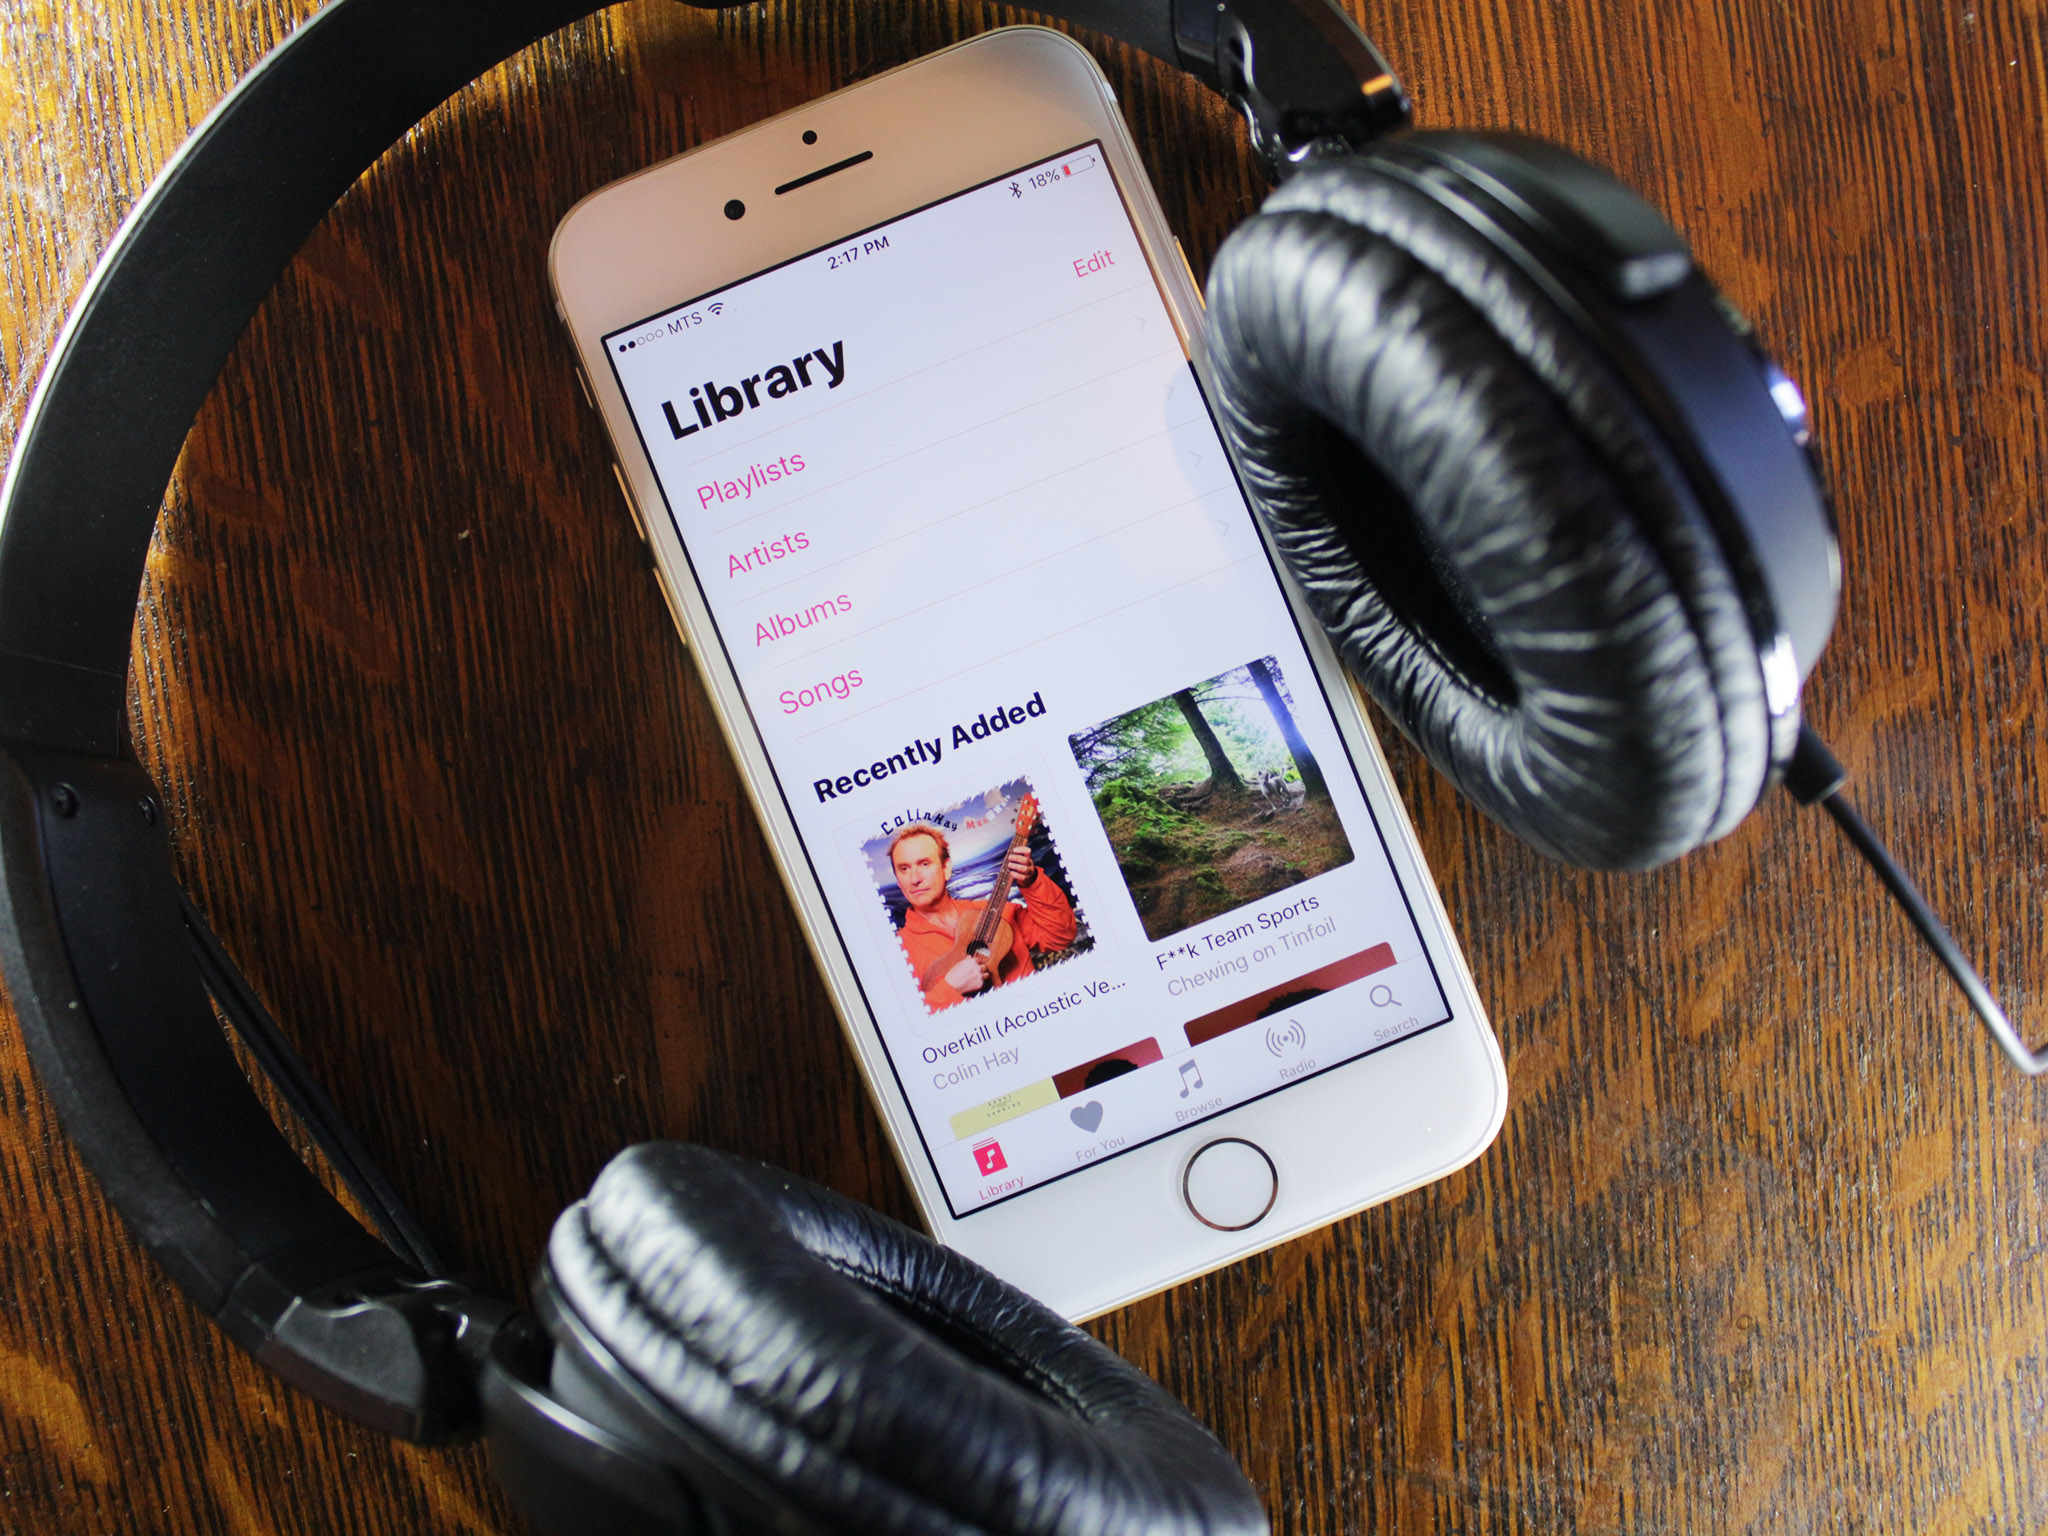 How would you change Apple Music?